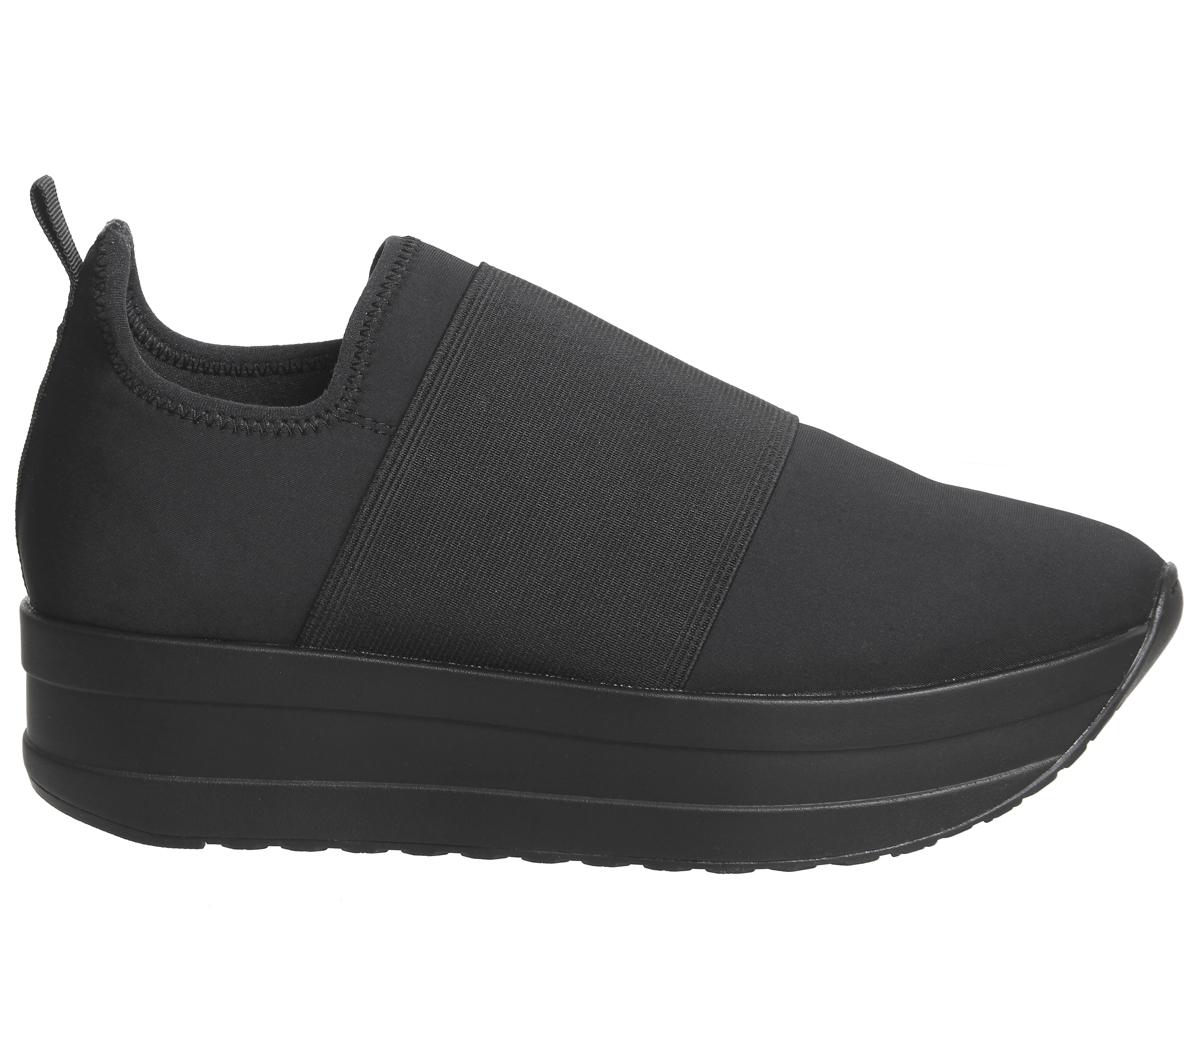 At adskille Picasso Fugtighed Vagabond Rubber Casey Sister Trainers in Black - Lyst